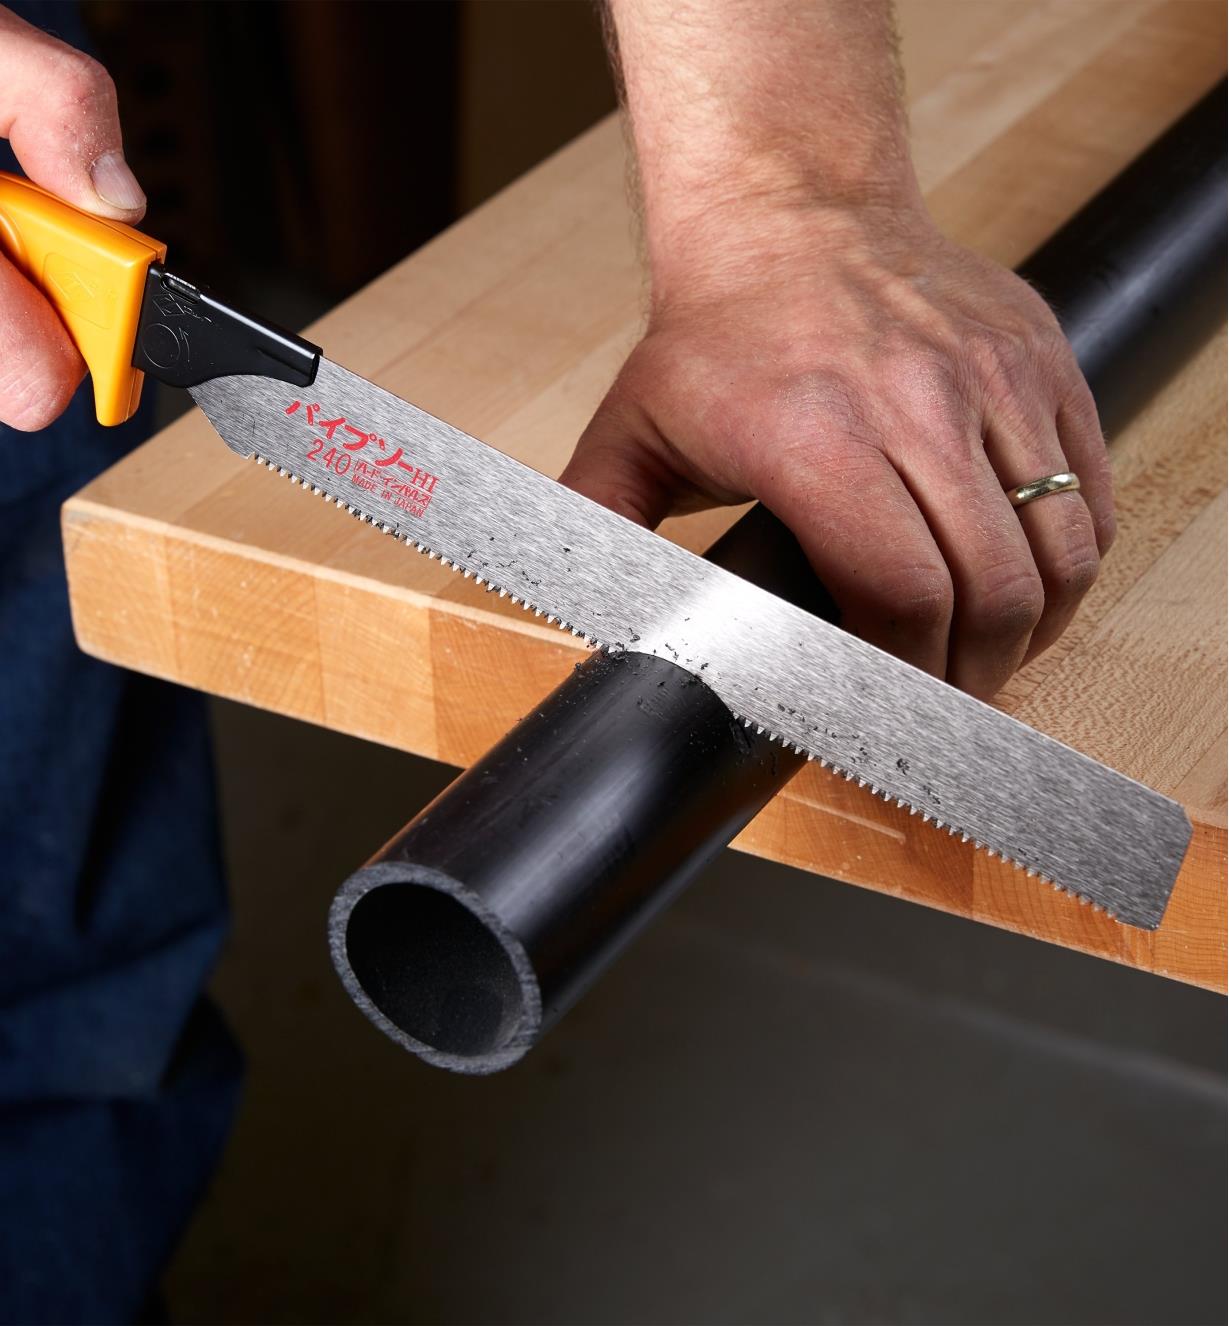 Cutting plastic pipe using a Japanese utility saw